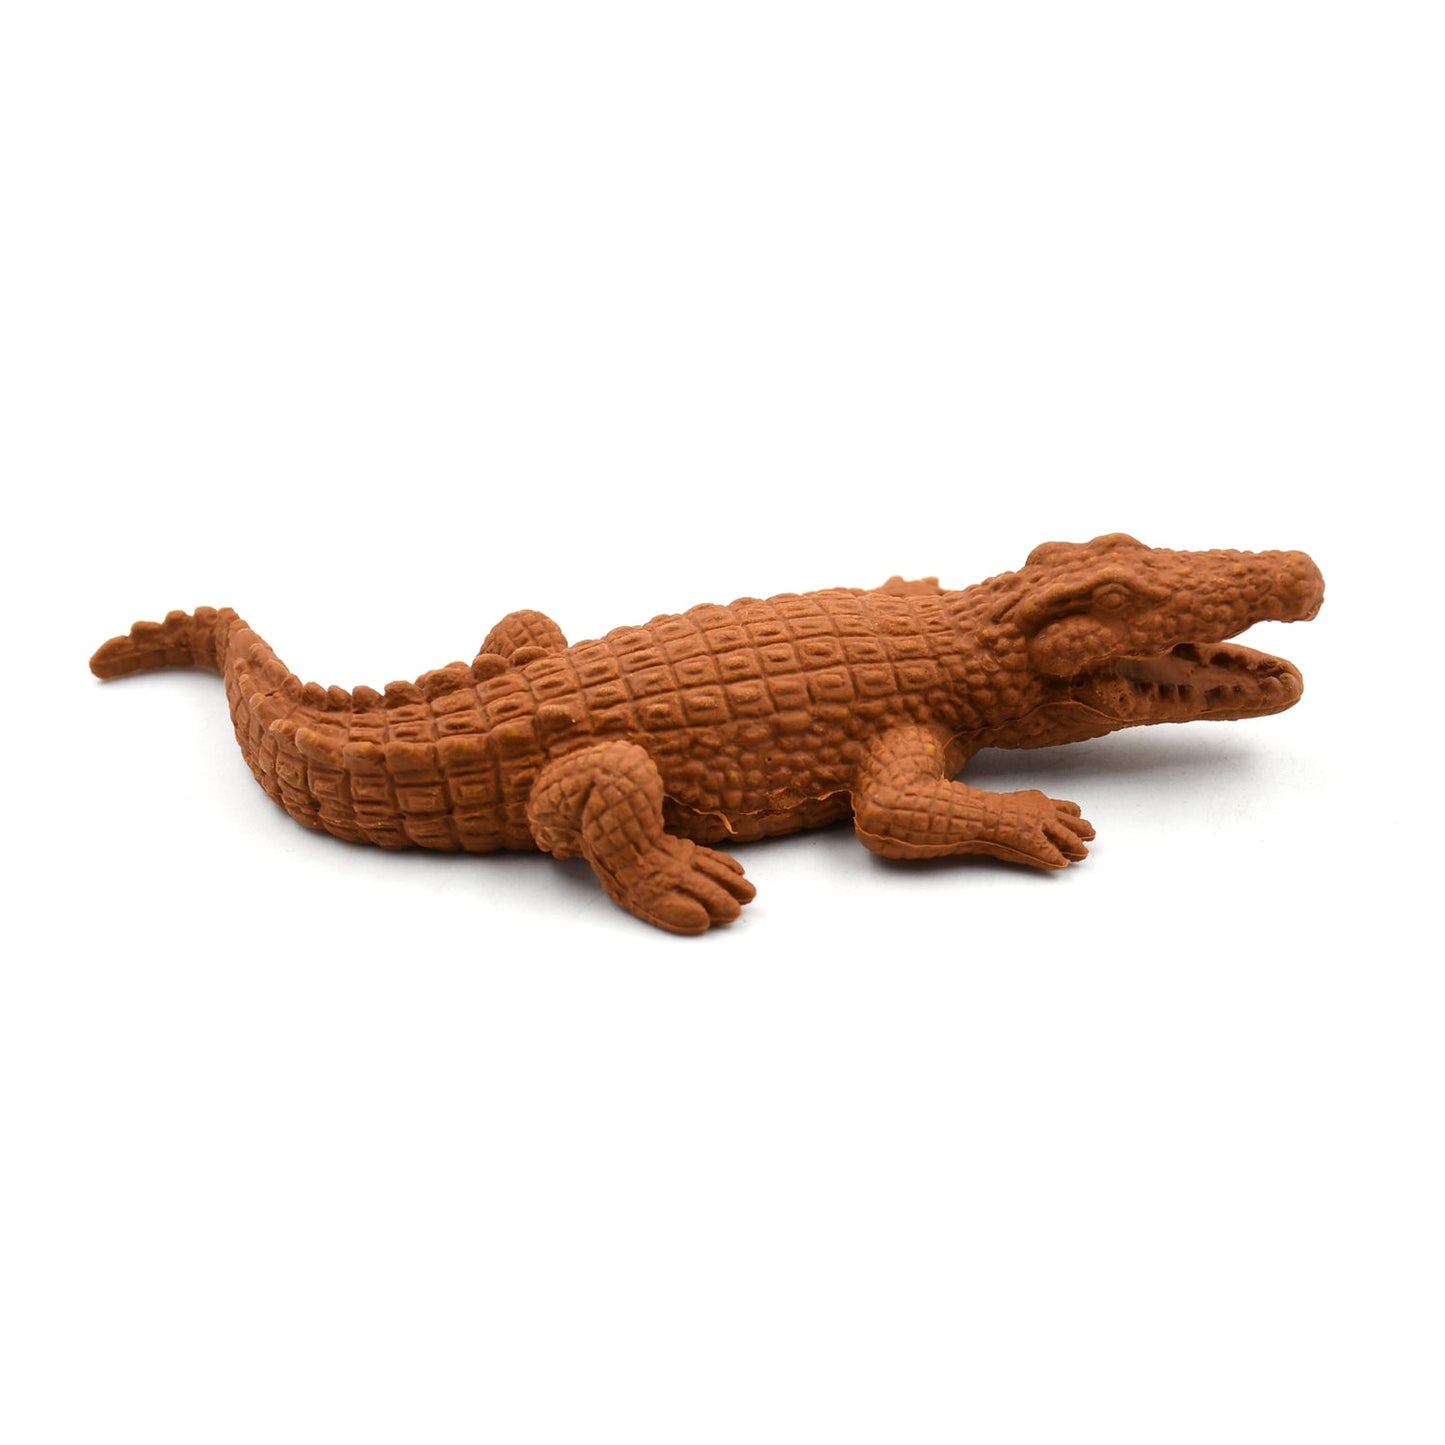 4576A CROCODILE SHAPED ERASERS ANIMAL ERASERS FOR KIDS, CROCODILE ERASERS 3D ERASER, MINI ERASER TOYS, DESK PETS FOR STUDENTS CLASSROOM PRIZES CLASS REWARDS PARTY FAVORS